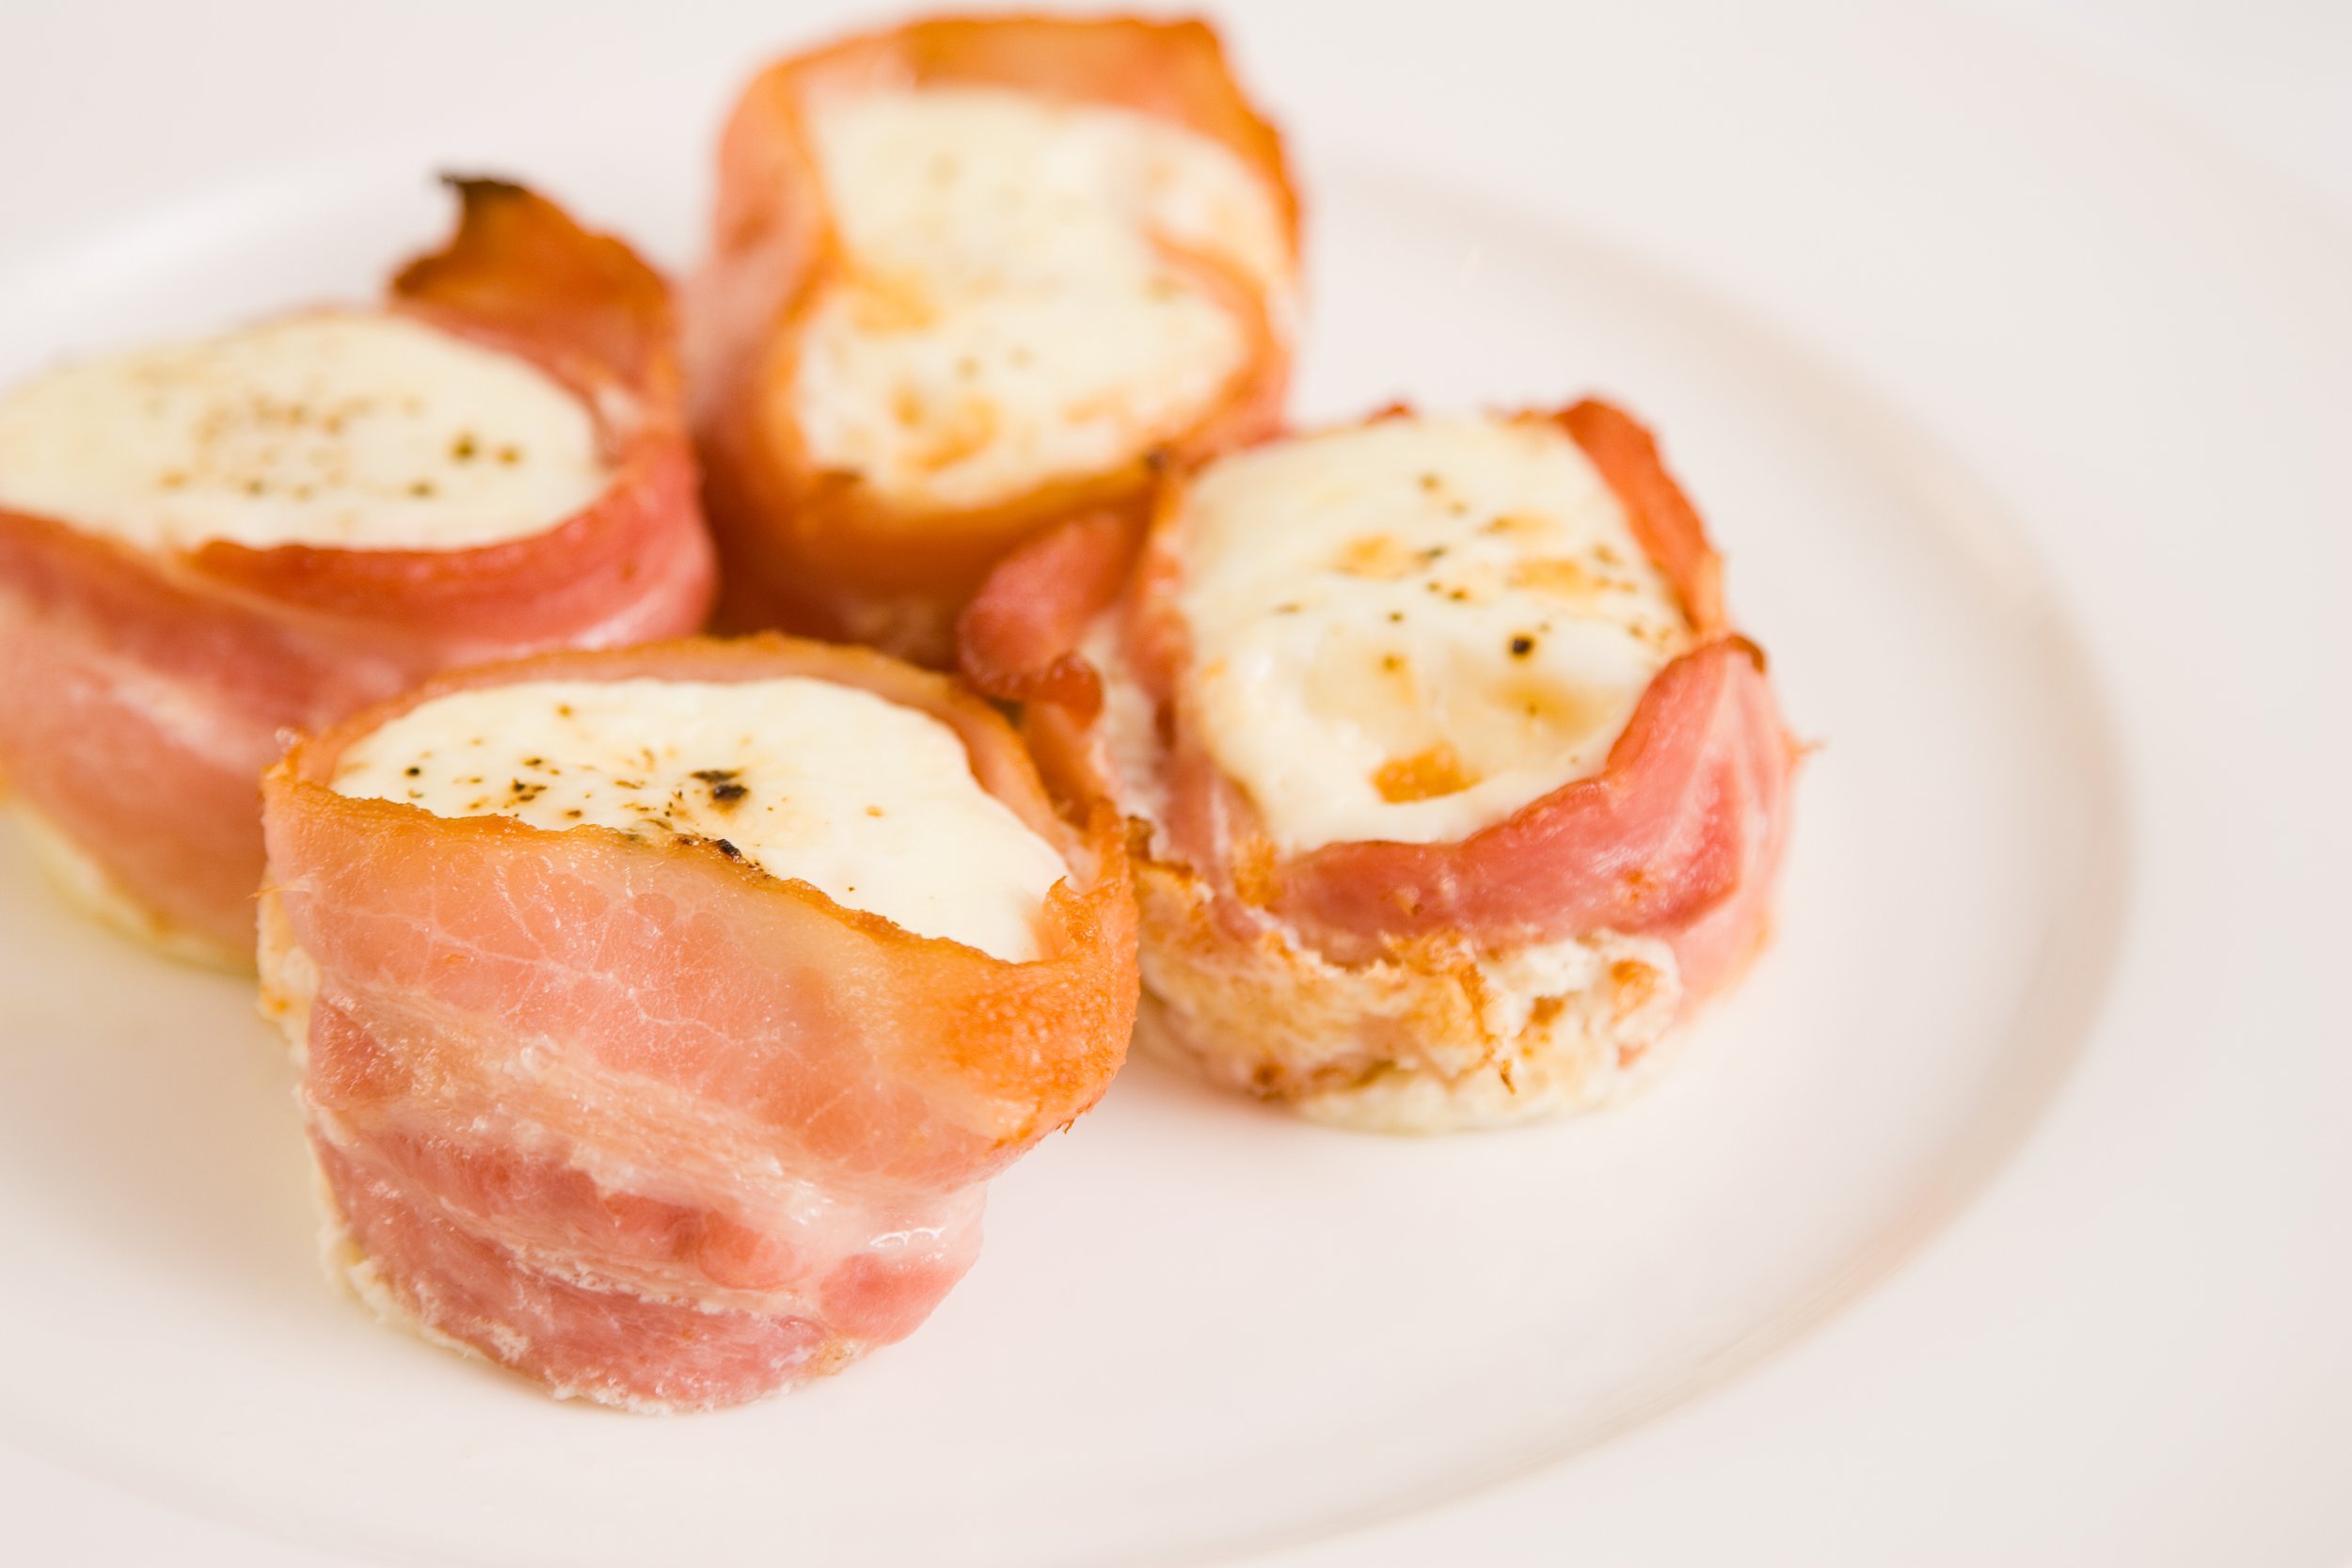 ANNA_Baked_eggs_wrapped_in_bacon_3.jpg